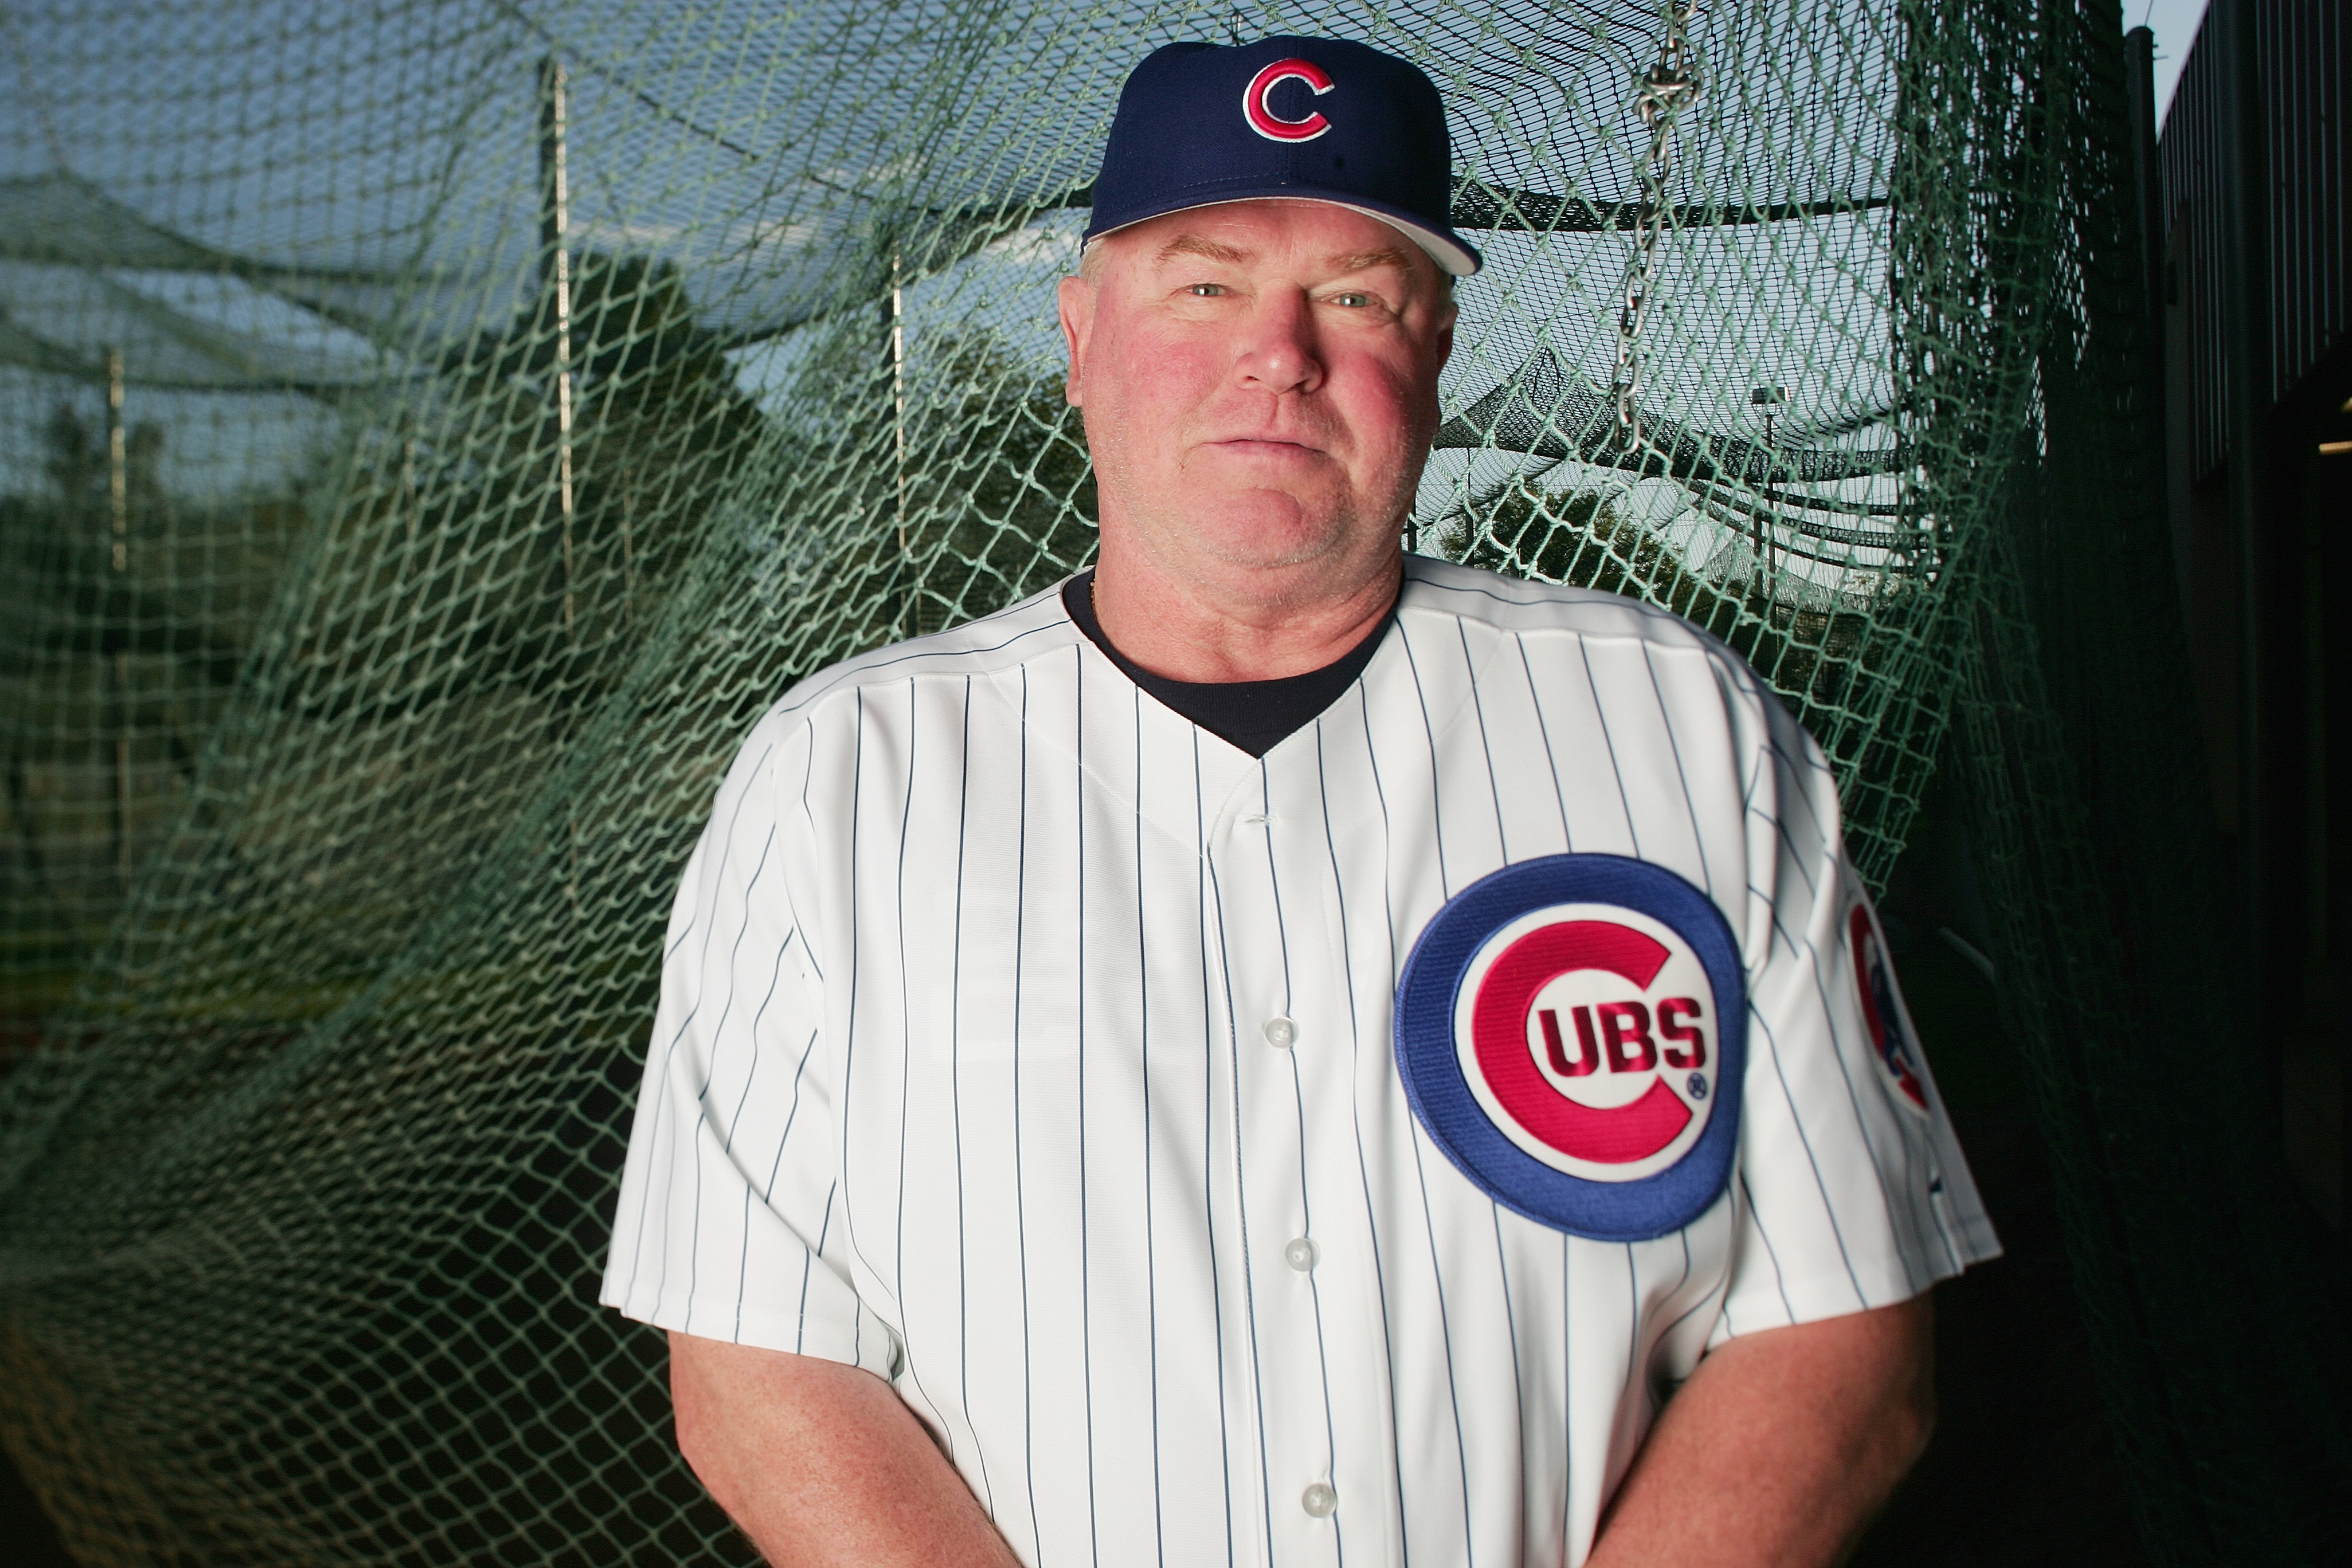 MESA, AZ - FEBRUARY 25:  Dick Pole #39 of the Chicago Cubs poses during Spring Training Photo Day at Fitch Park on February 25, 2005 in Mesa, Arizona. (Photo by Jed Jacobsohn/Getty Images)